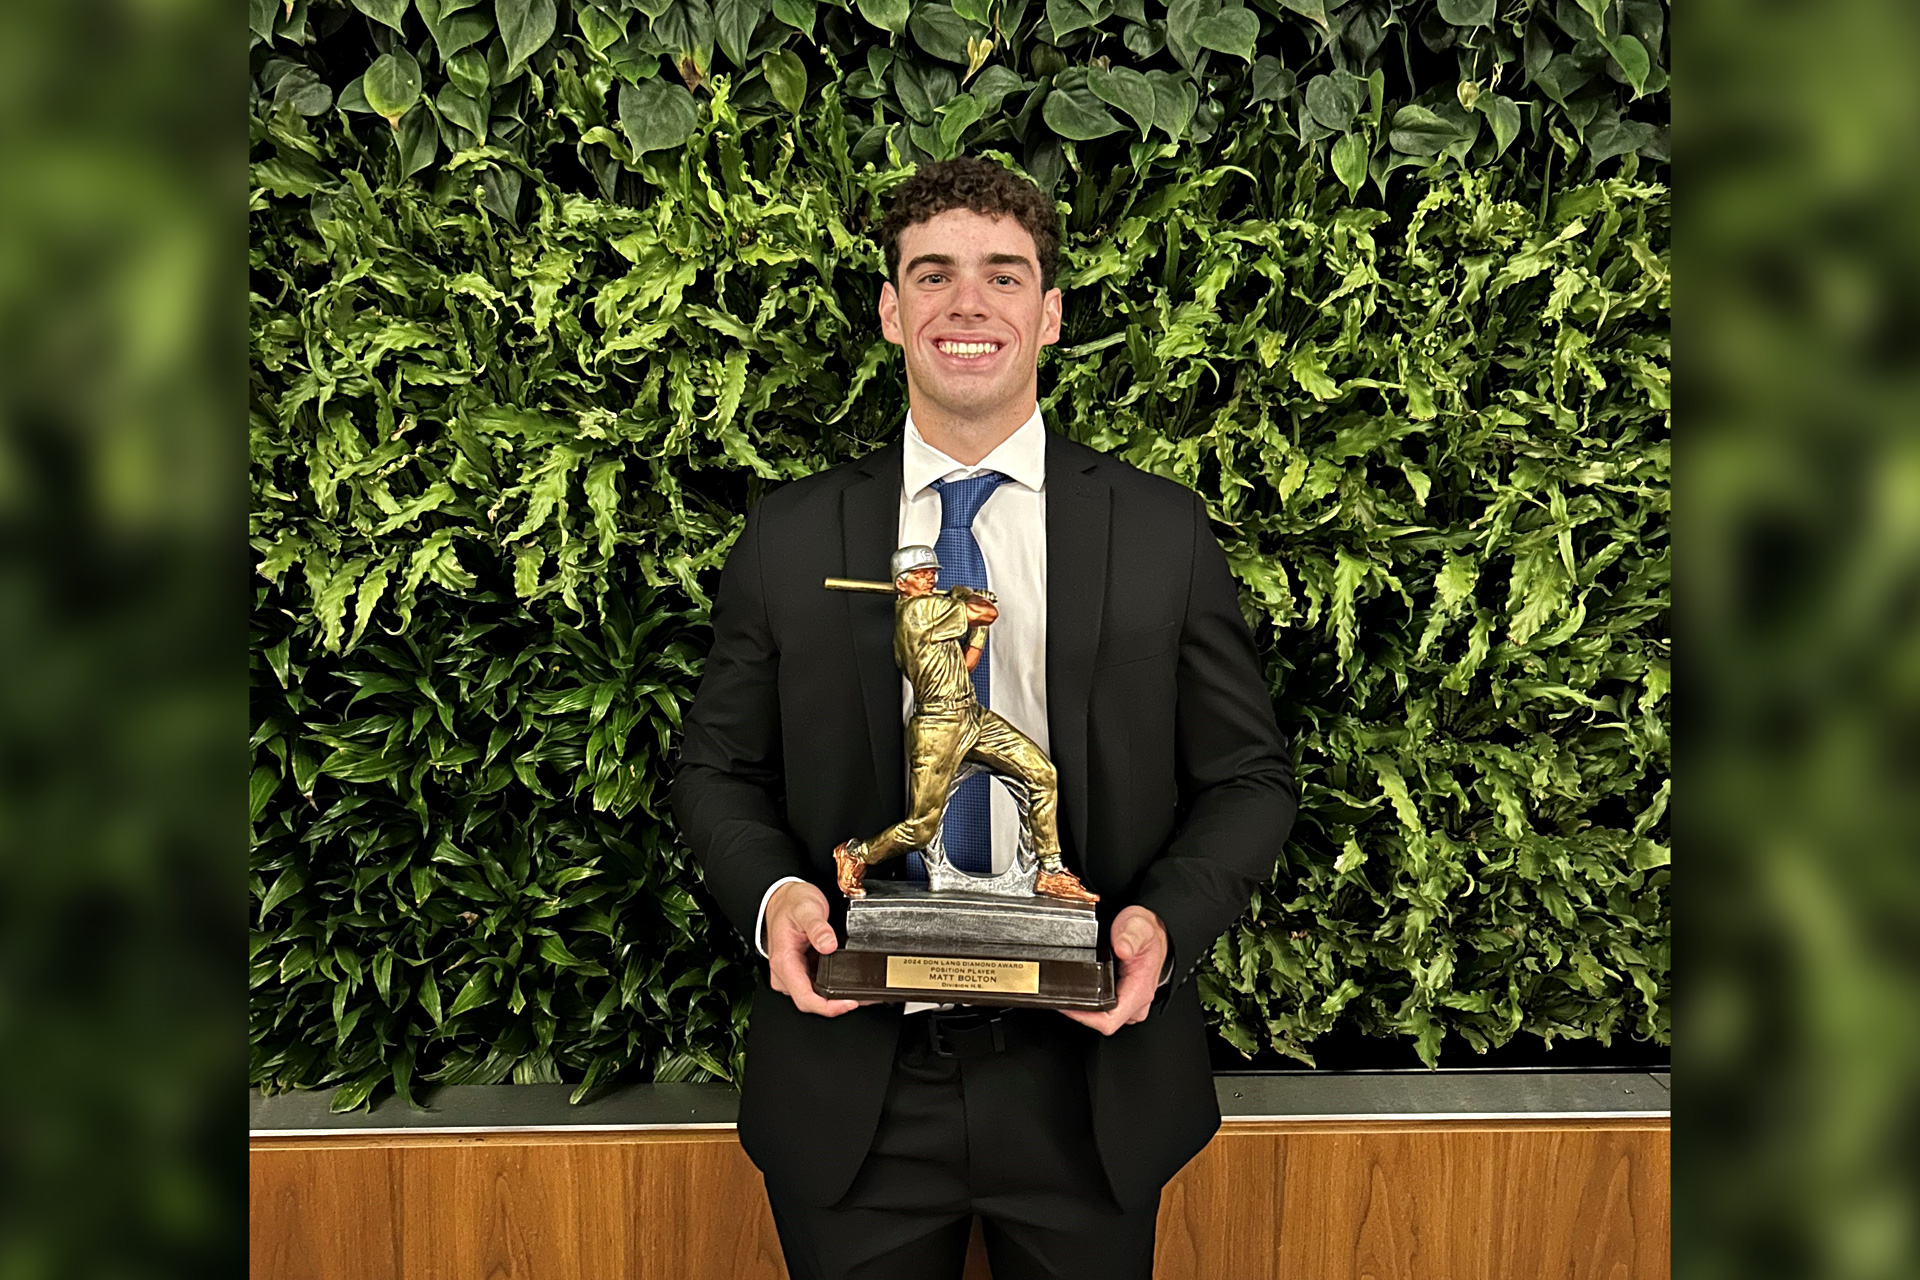 Senior Matt Bolton won the Diamond Award for Position Player which is presented to the best player in Nassau County at the Nassau County Coaches All County Dinner held at the Uniondale Marriott.